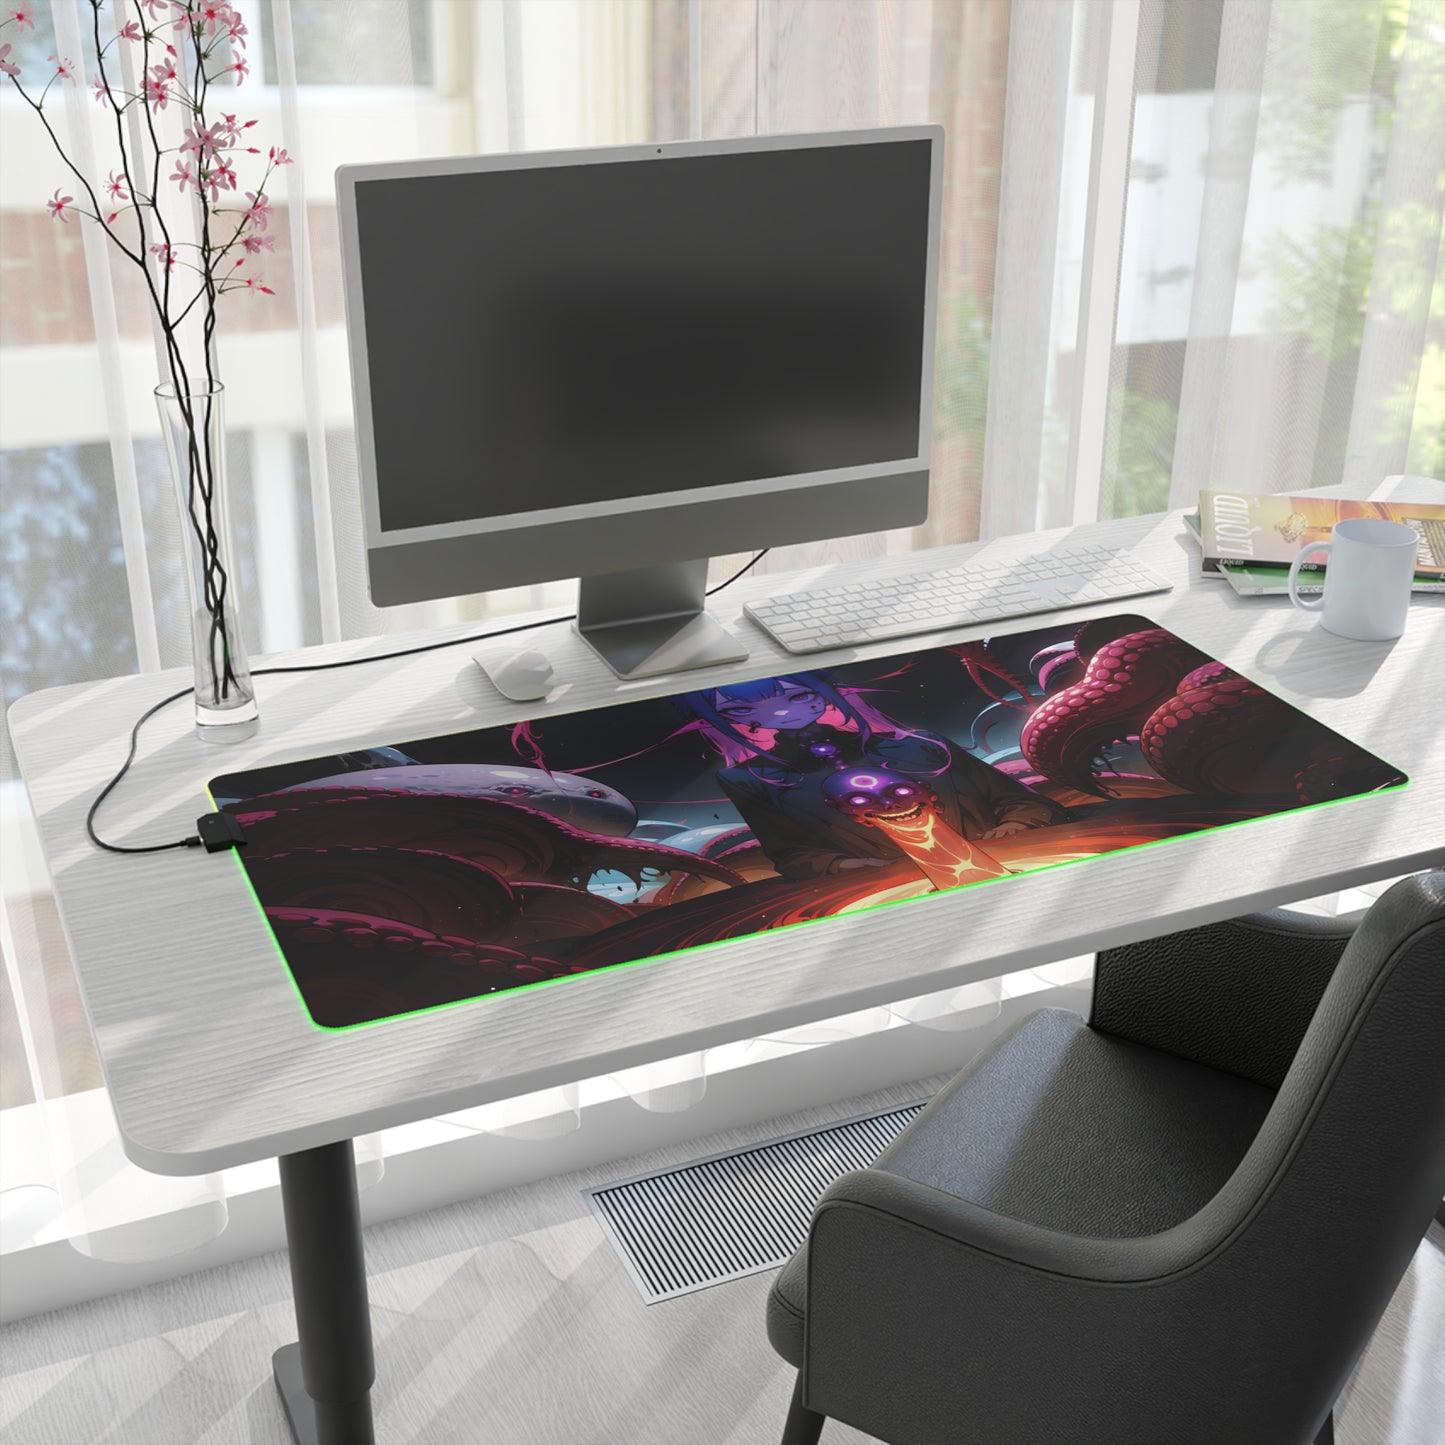 LCAM-19 LED Gaming Mouse Pad